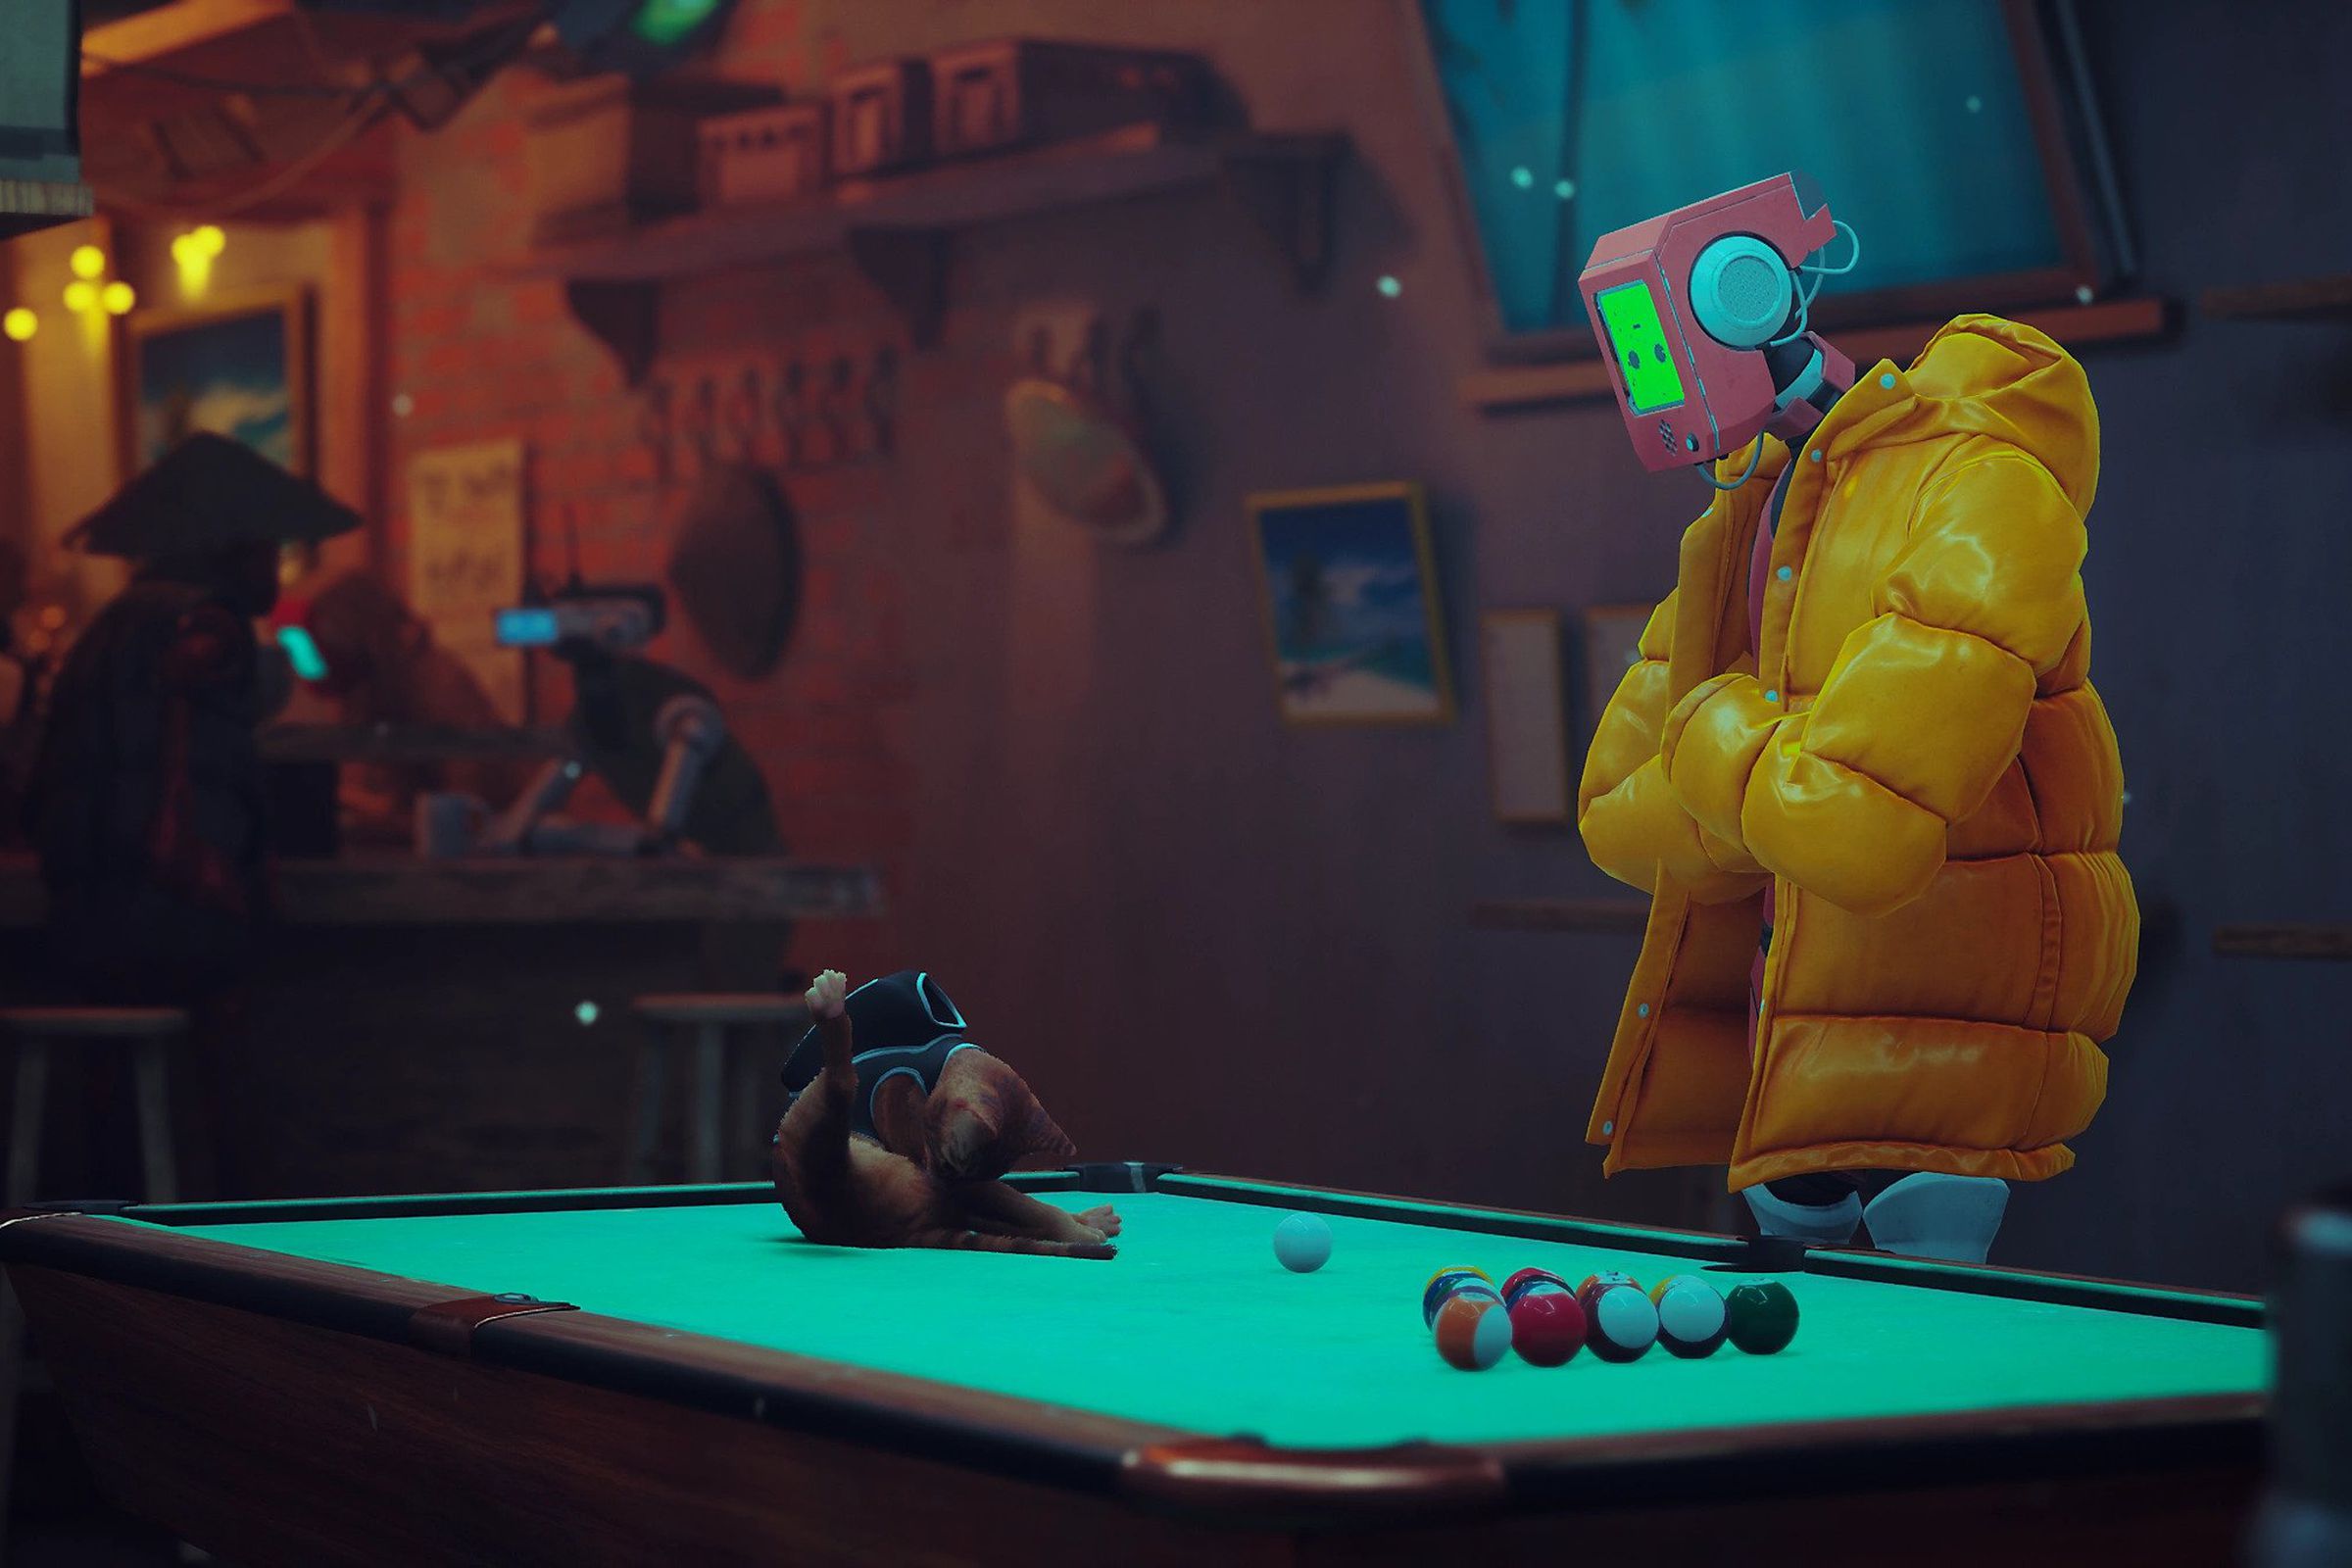 Screenshot from video game Stray featuring an image of orange tabby cat licking themself on a pool table as a robot in a puffy yellow jacket looks on intrigued.